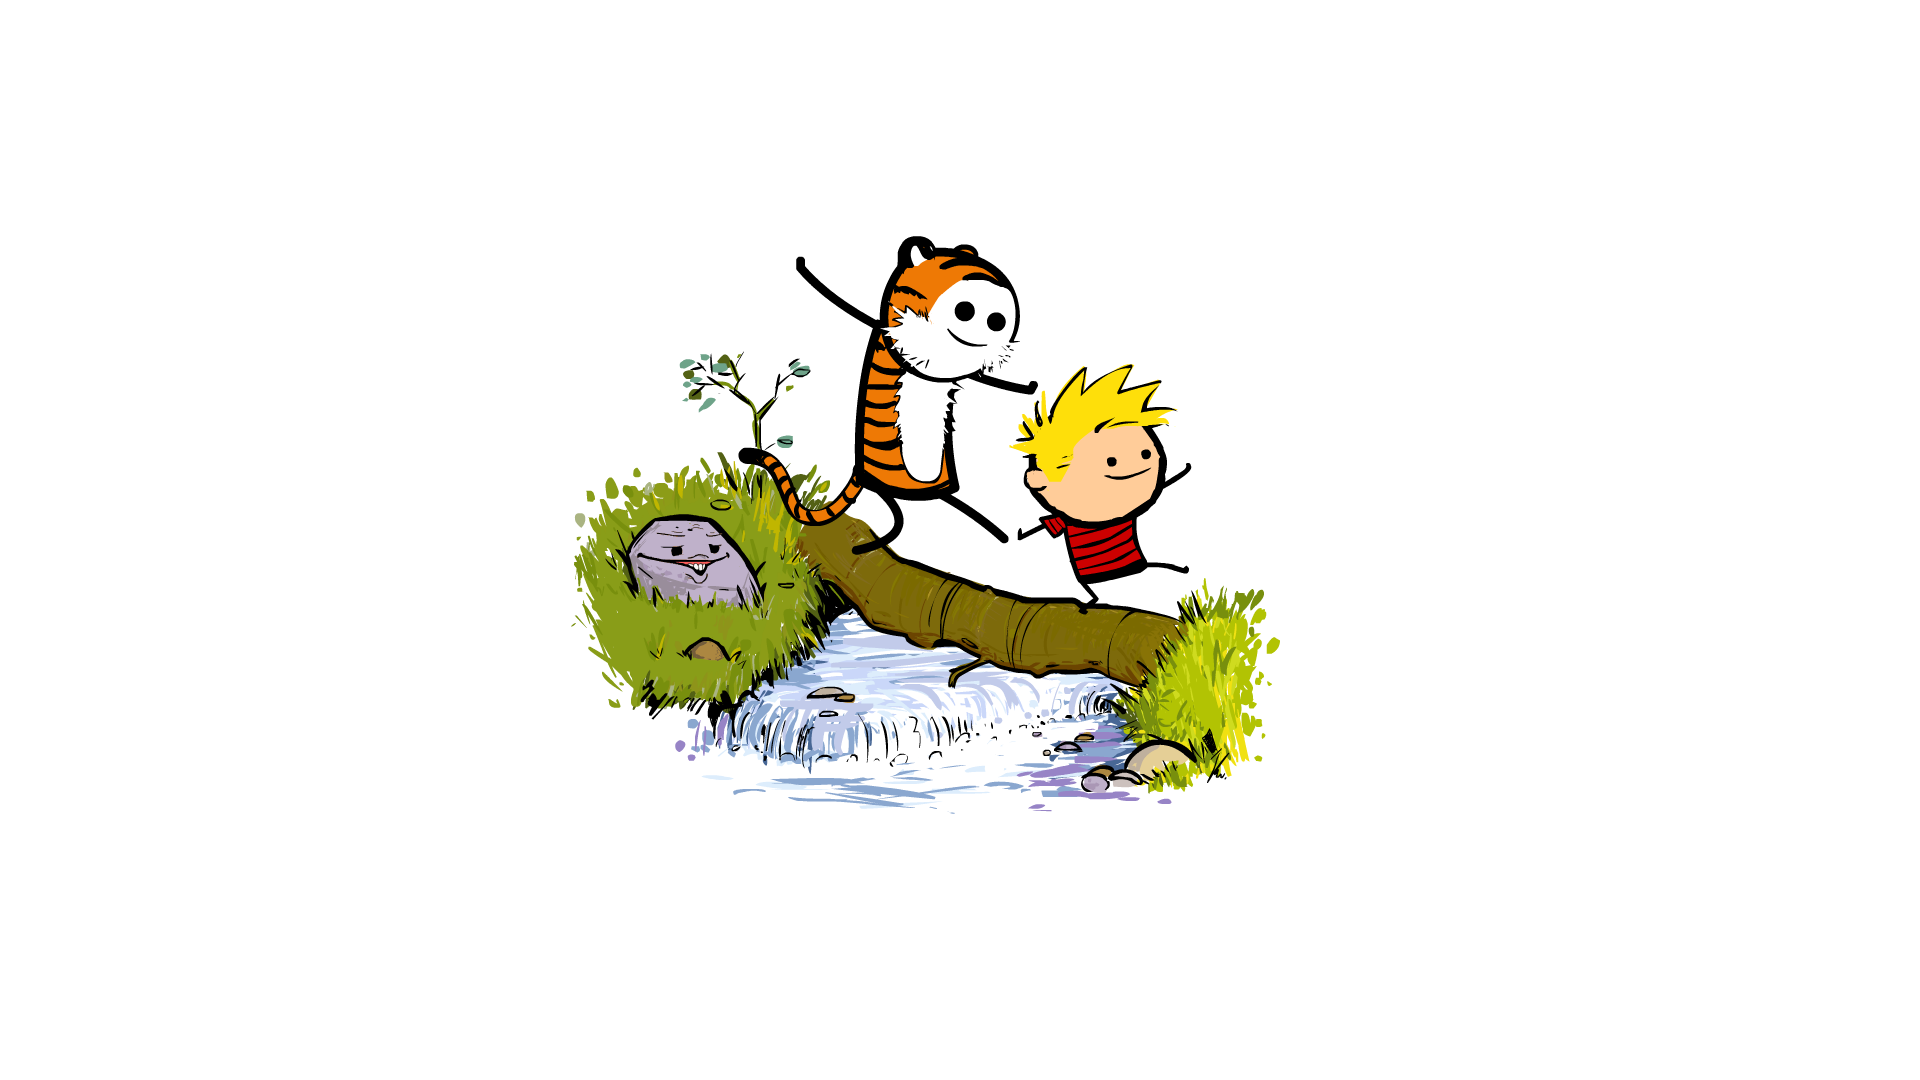 Download In Original Resolution - Calvin And Hobbes On The Log , HD Wallpaper & Backgrounds